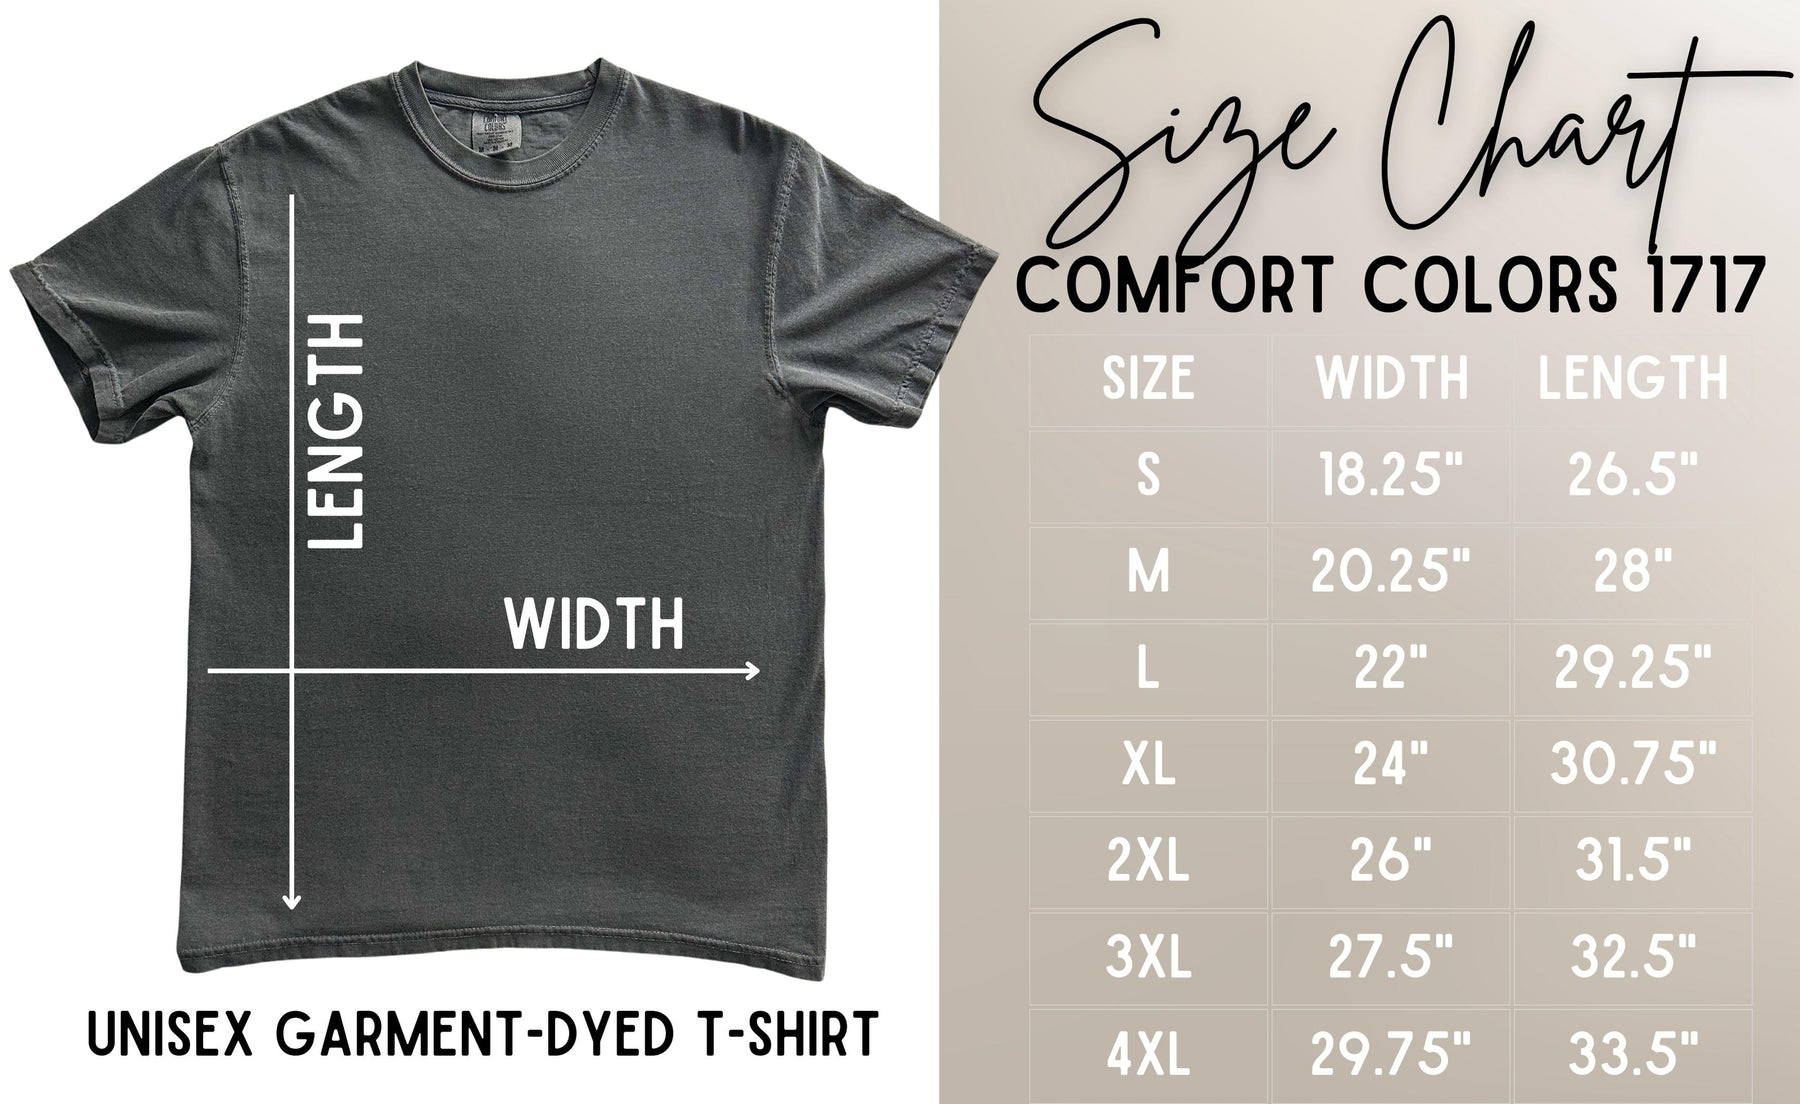 Here Lies My Patience - Comfort Colors T-Shirt Rose with Grace LLC